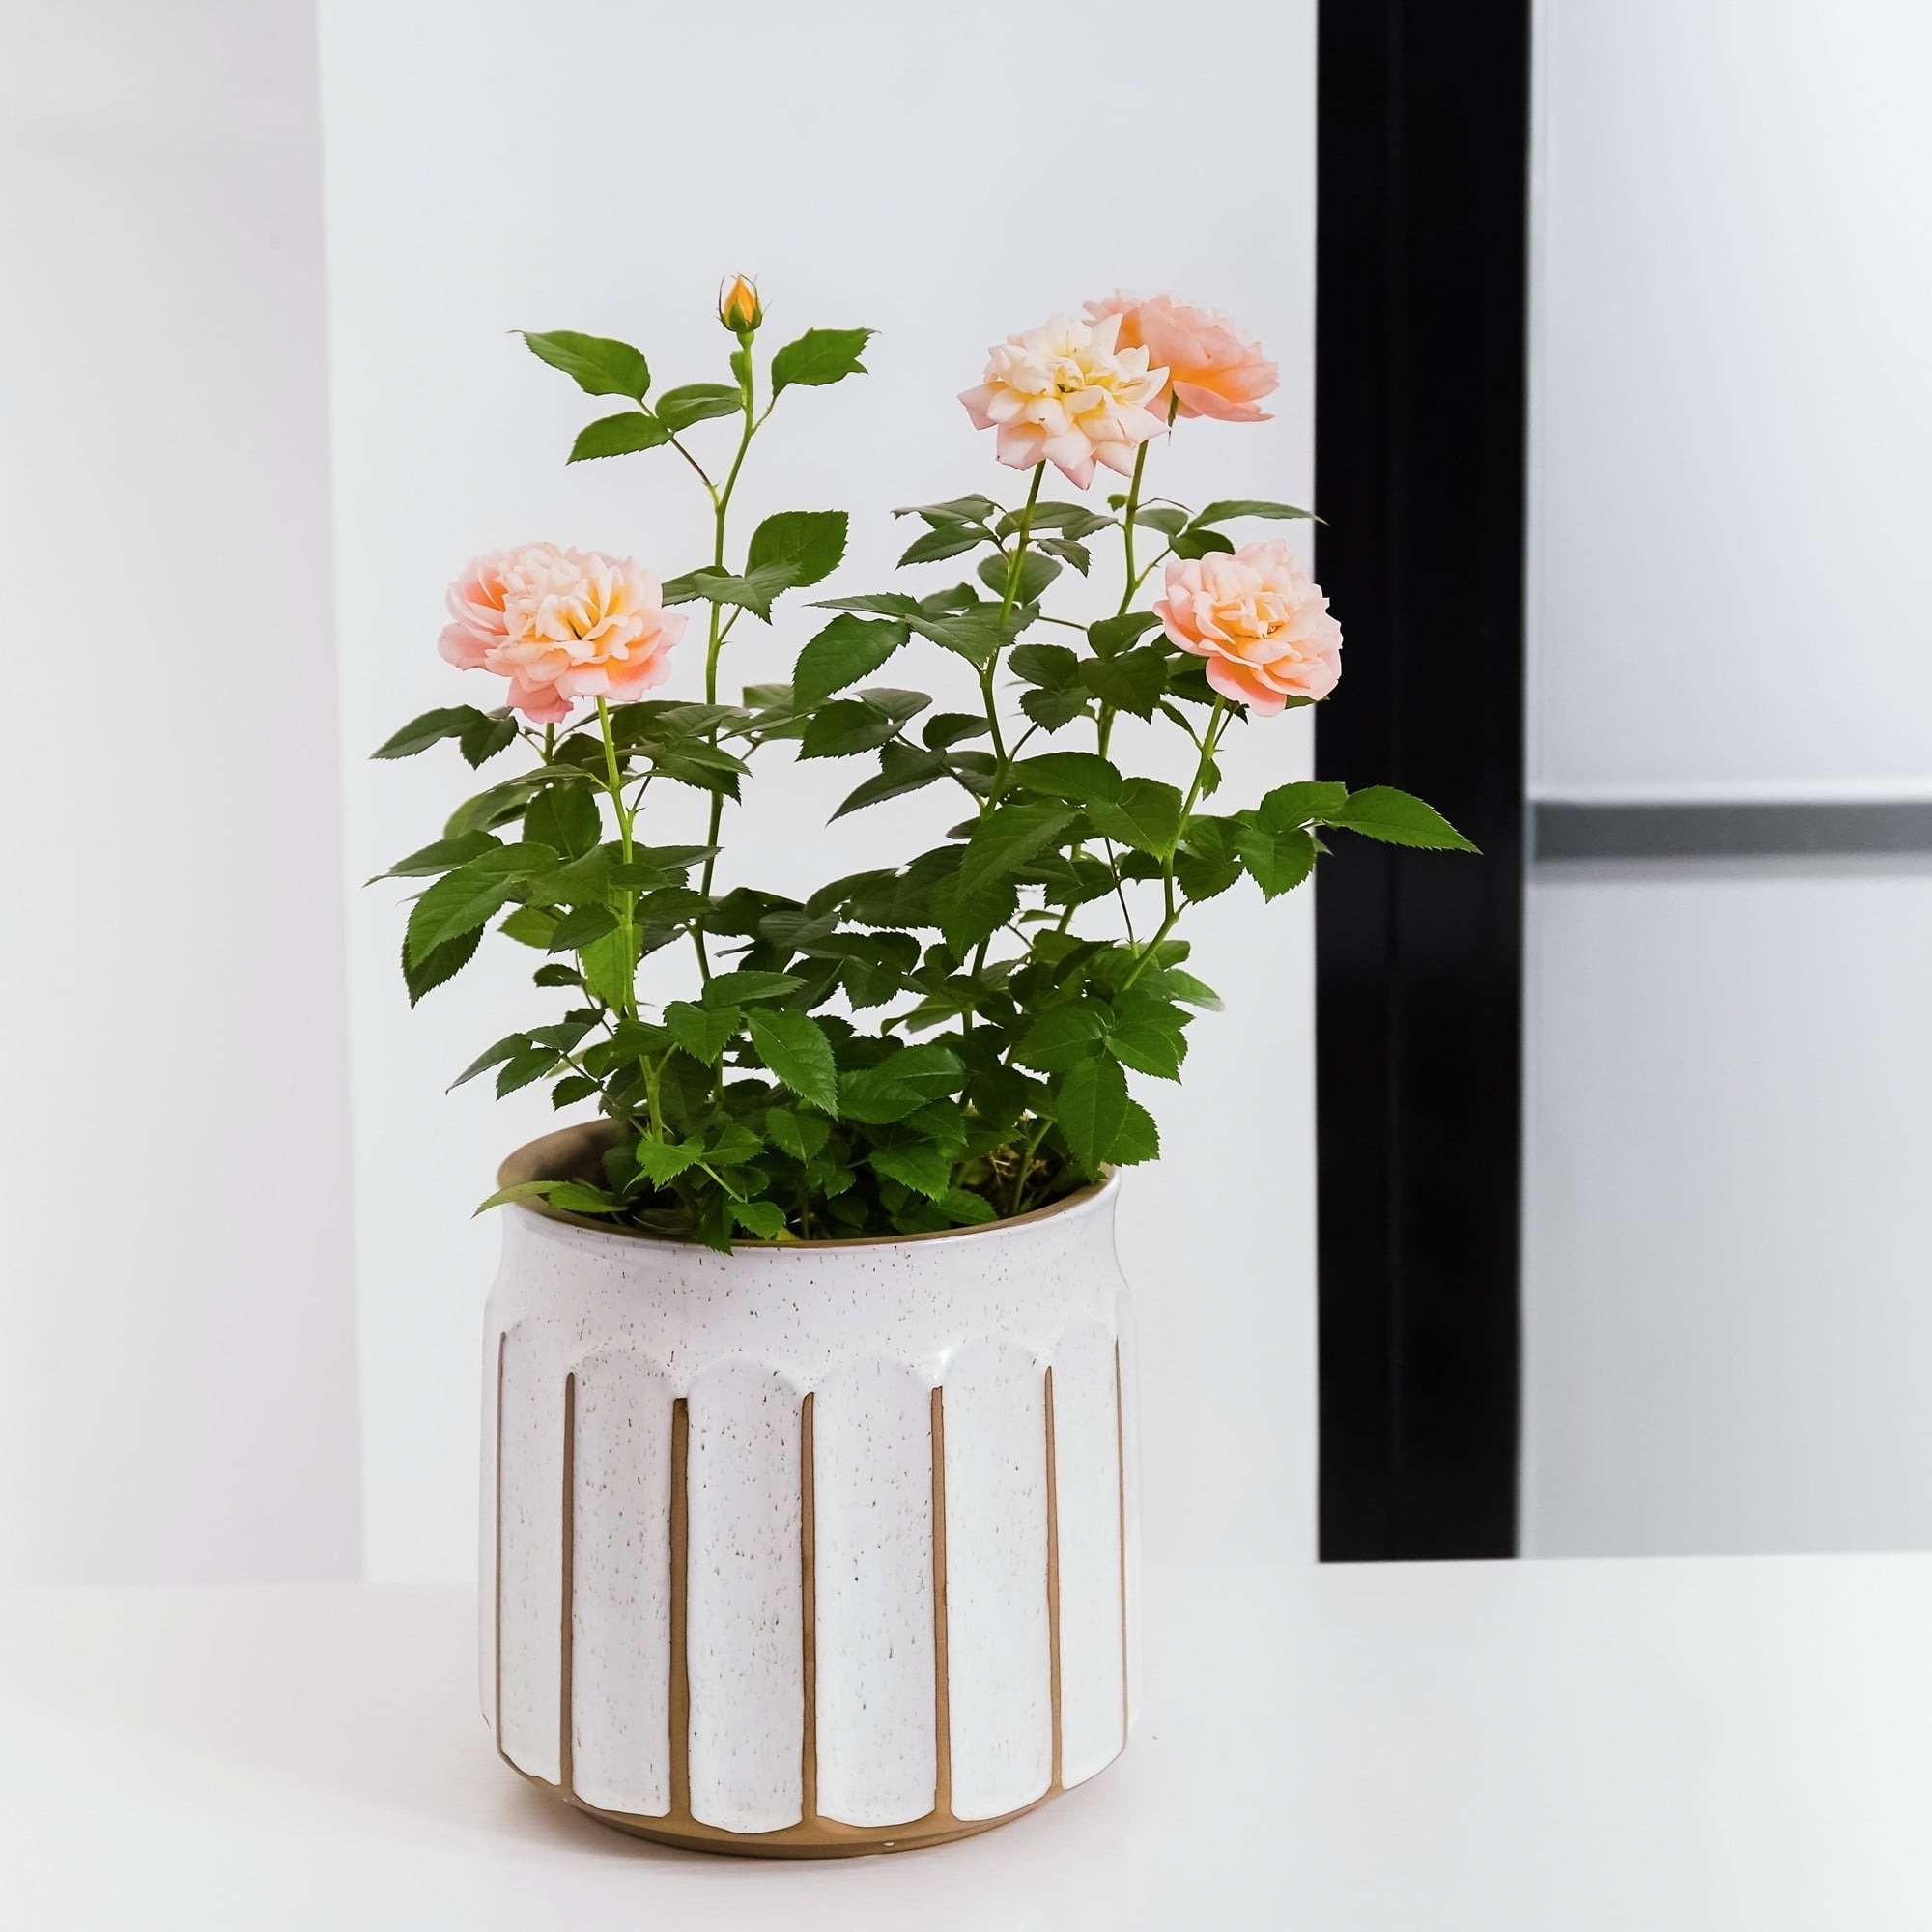 the off white speckly and brown ceramic planter